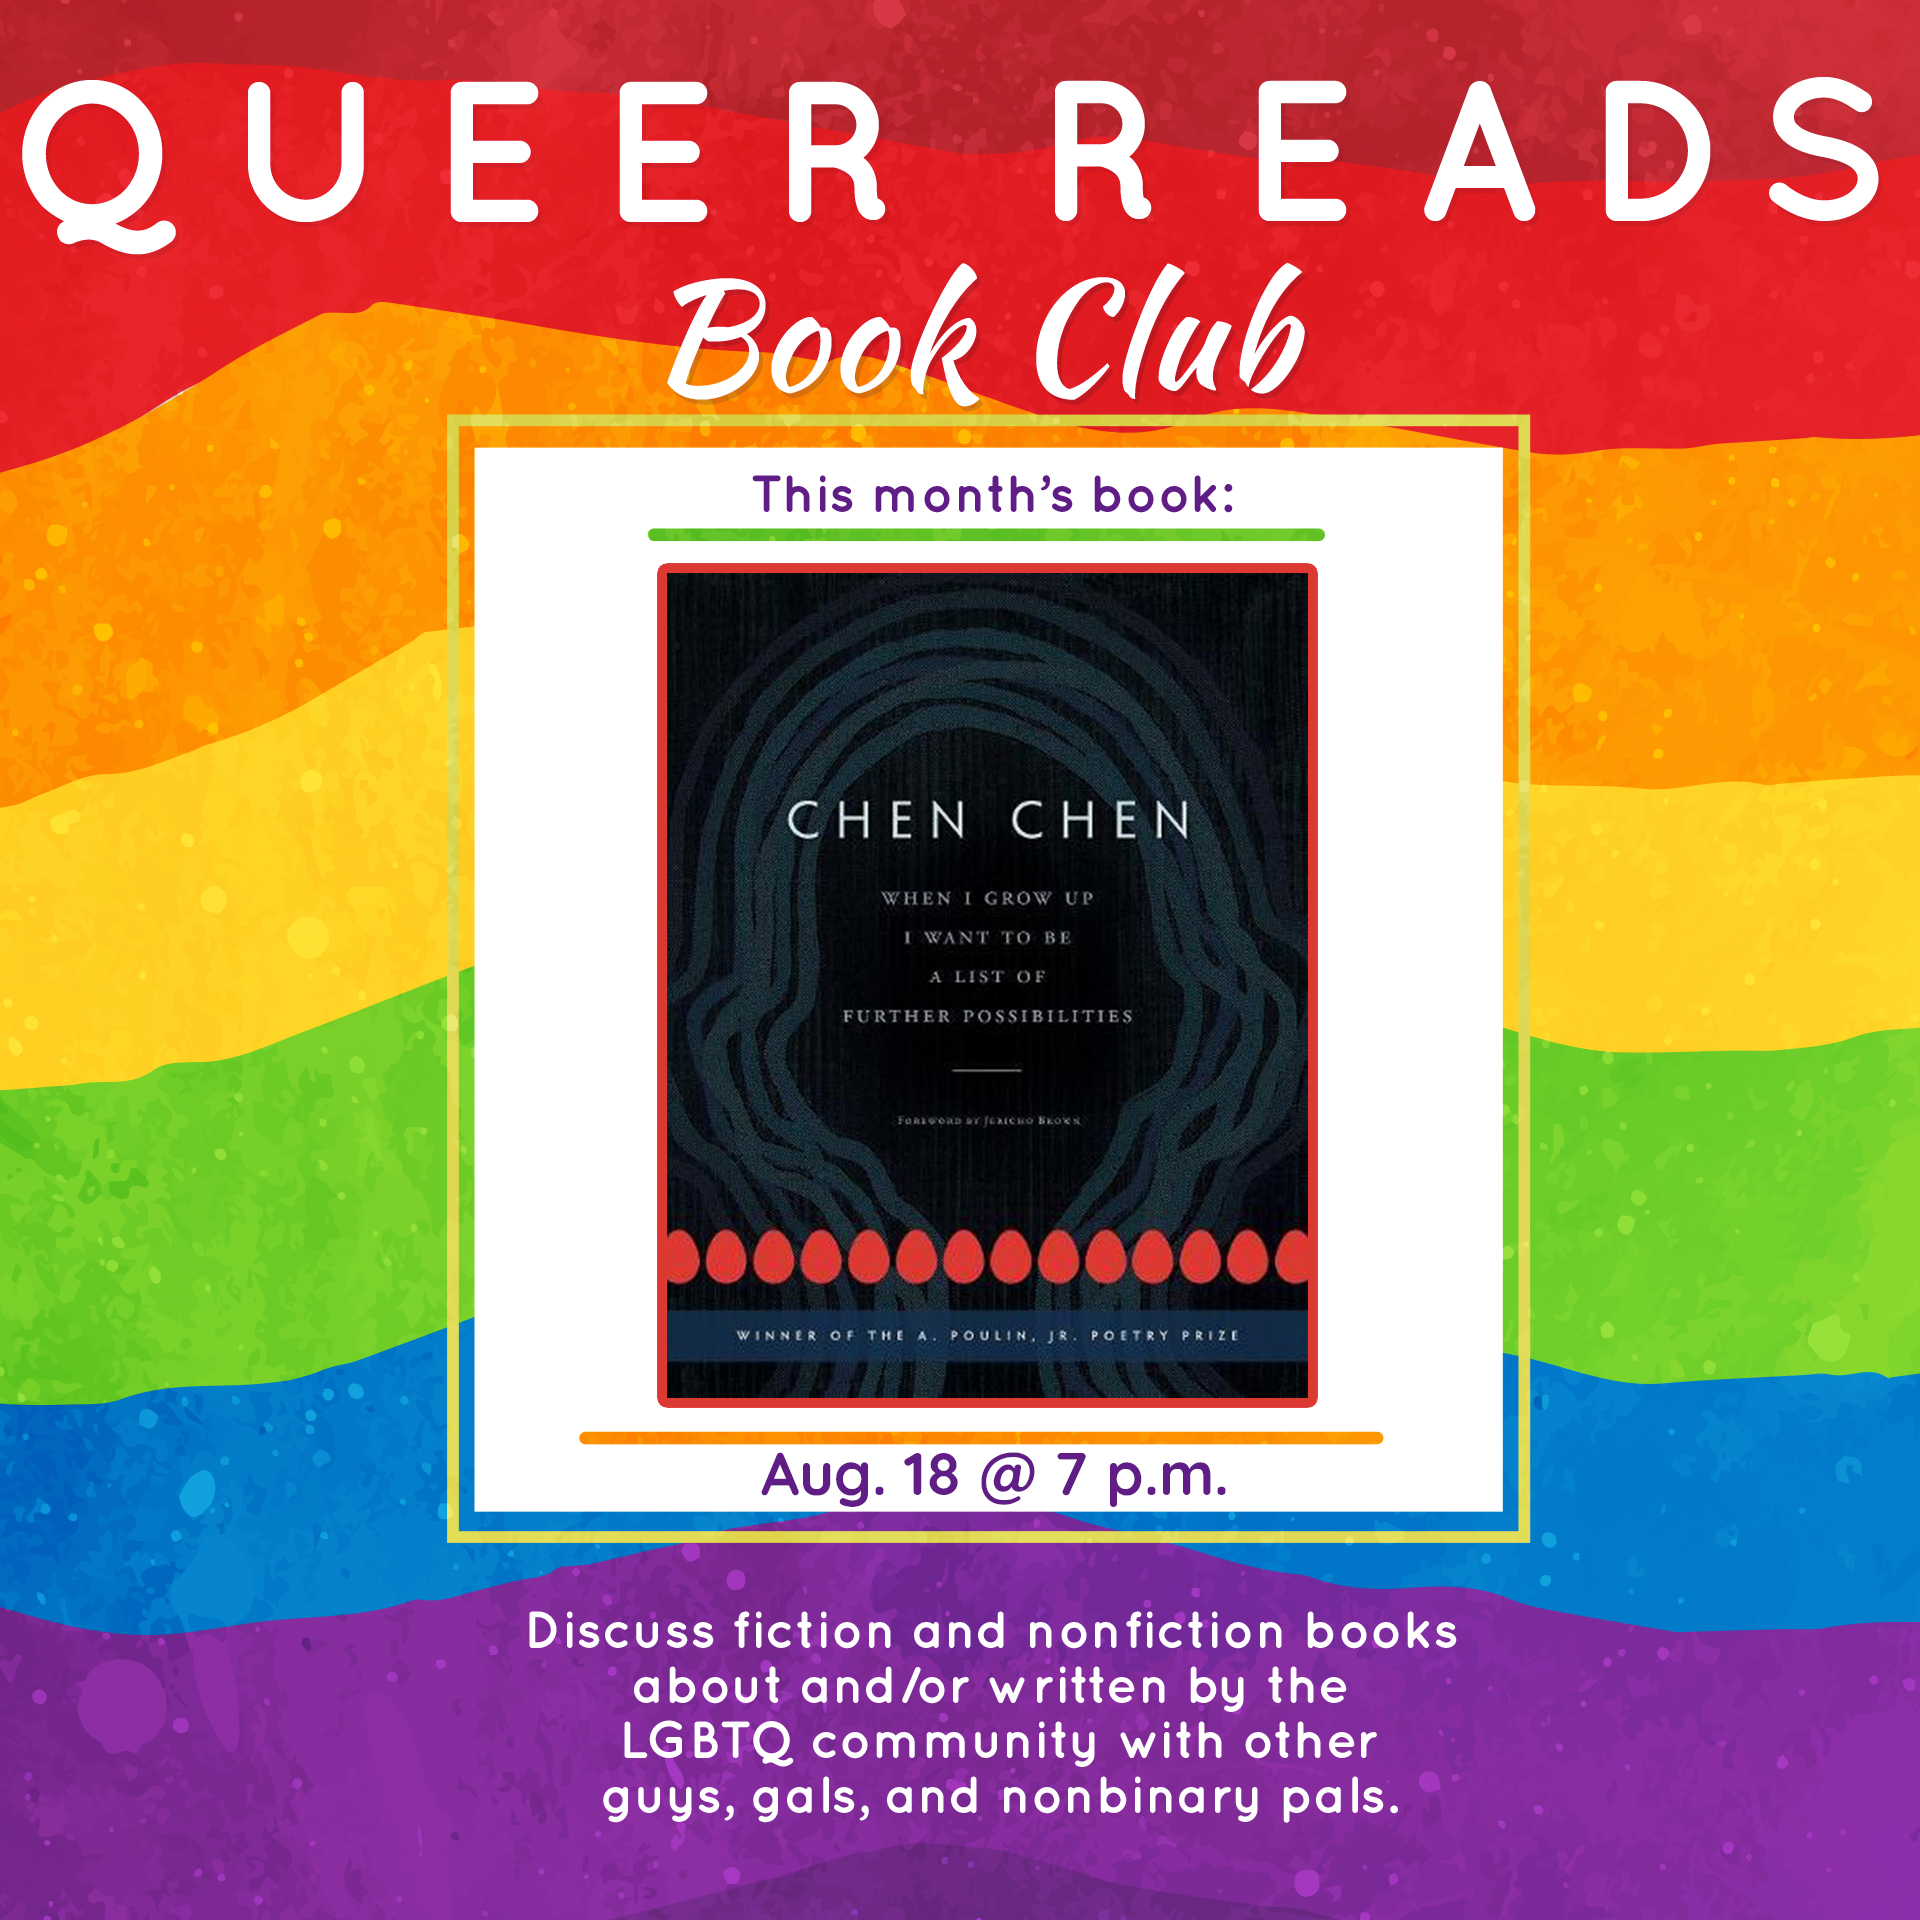 The book cover set against a rainbow background